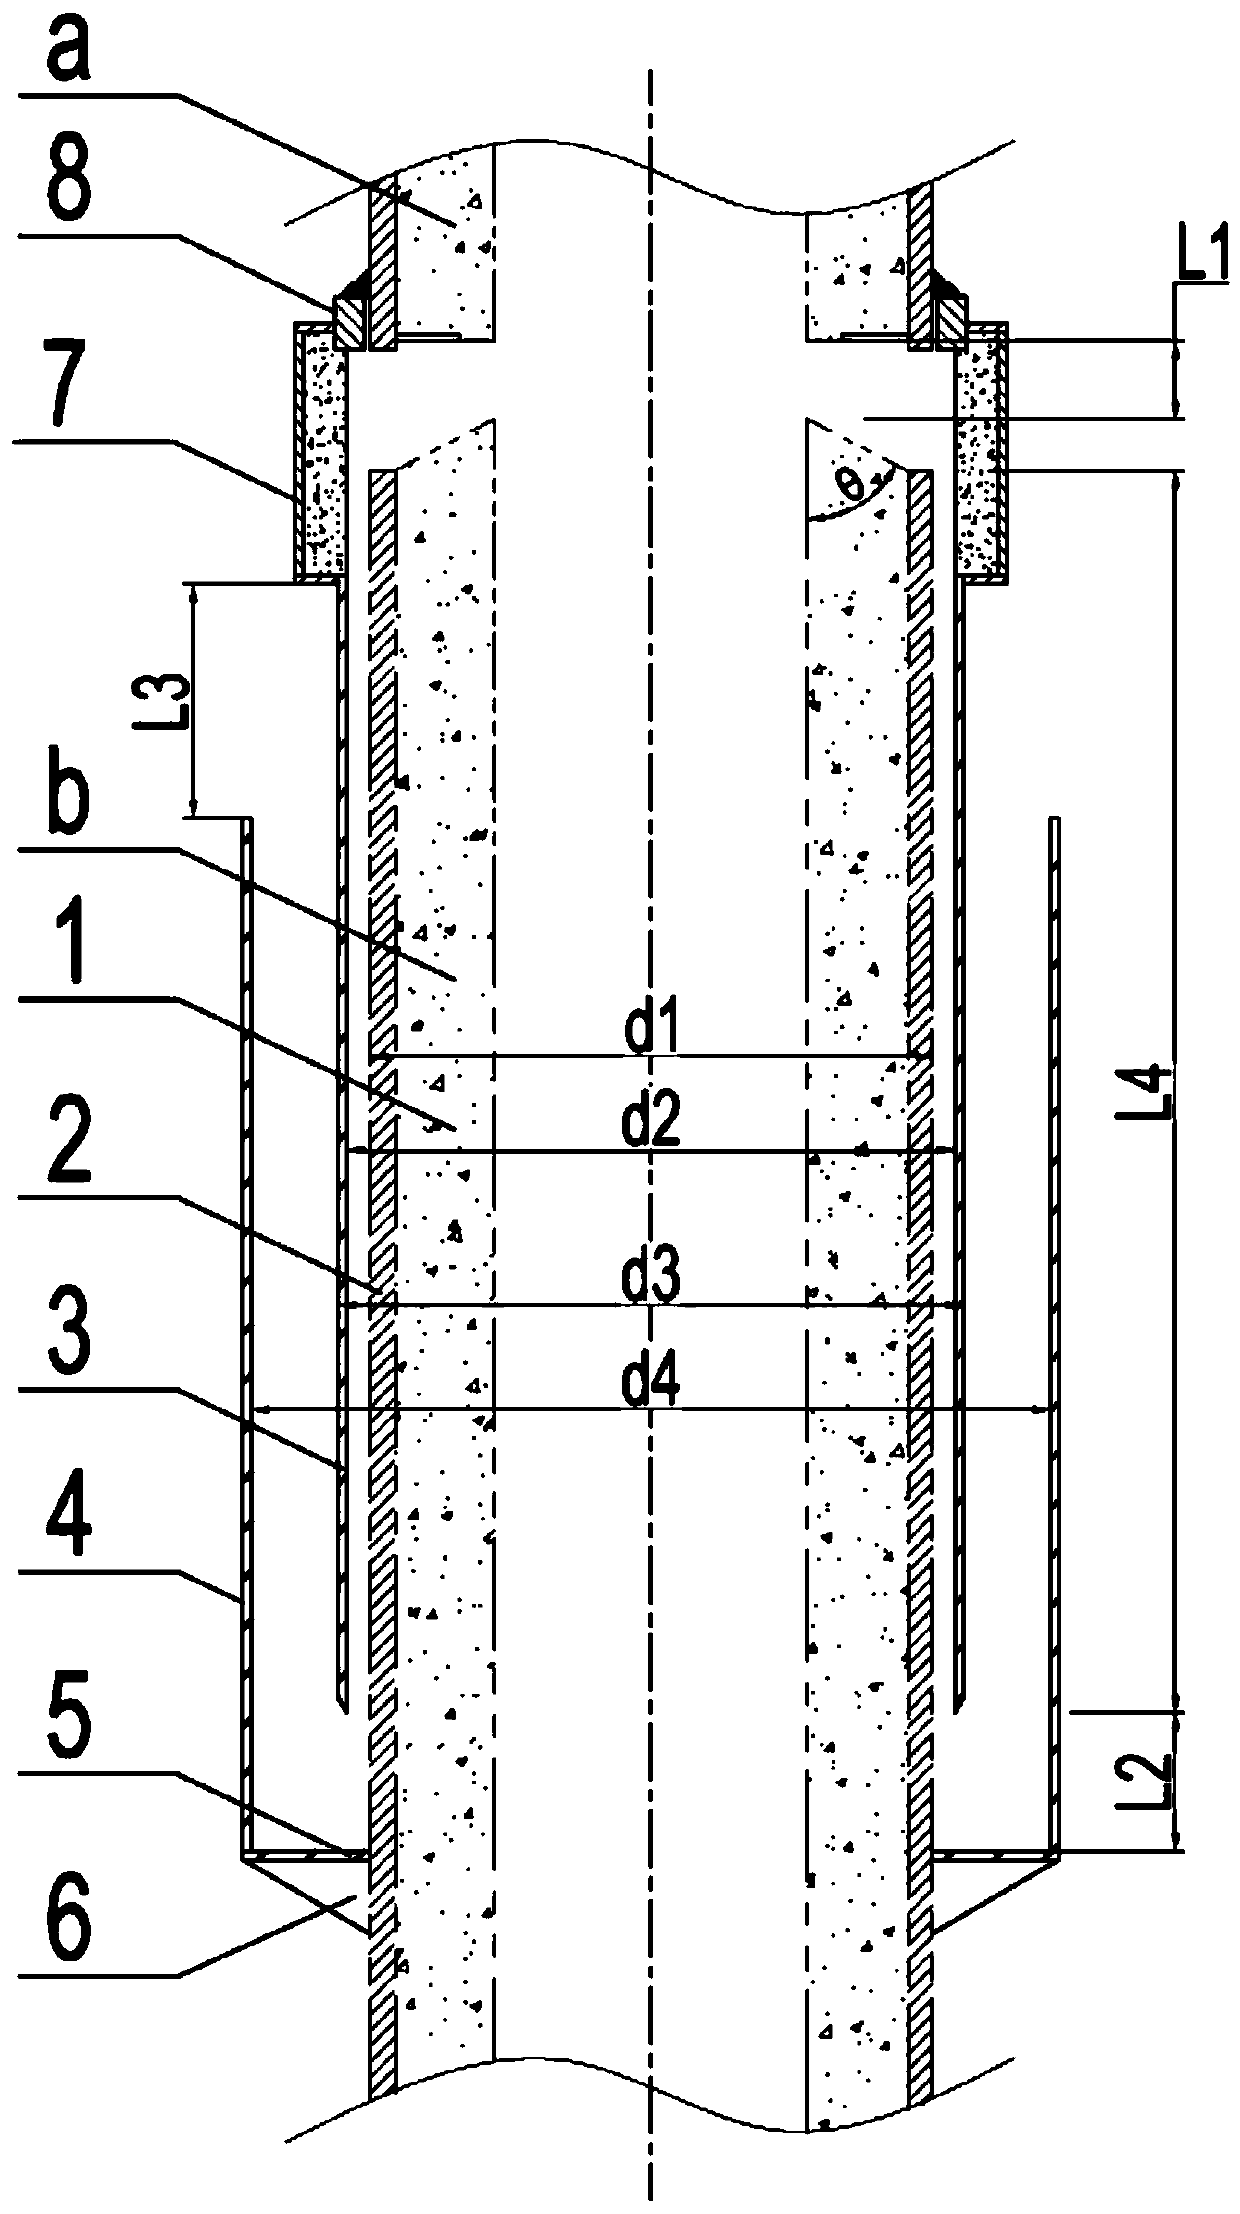 Powder conveying channel connection structure and method